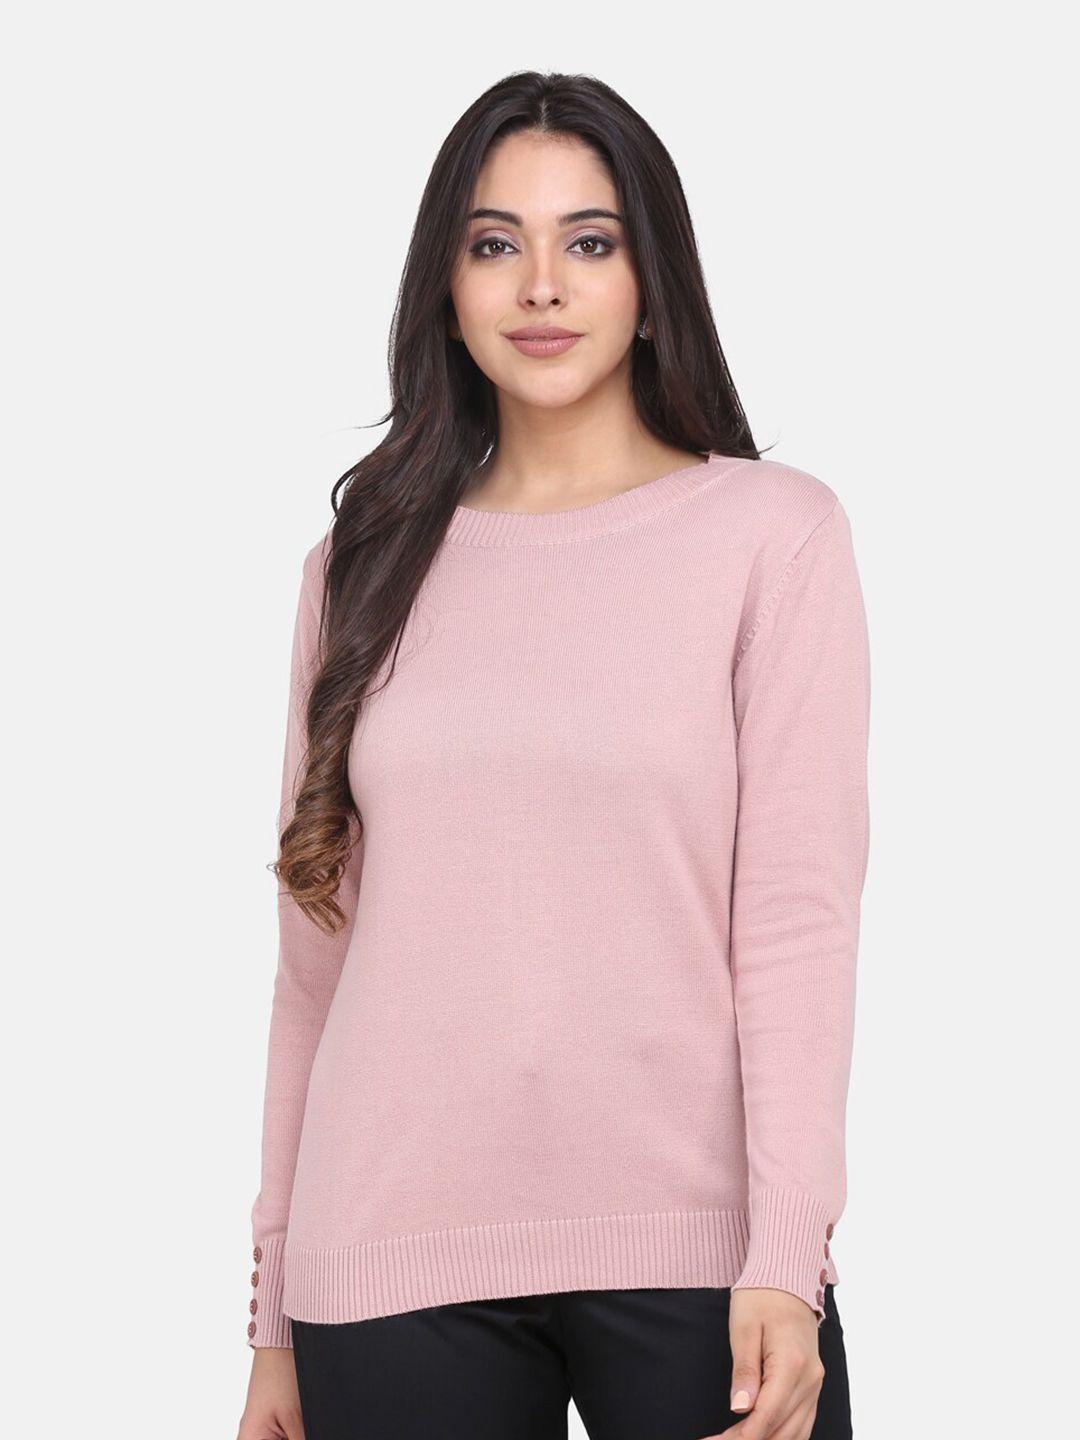 powersutra-women-pink-solid-full-sleeve-cotton-pullover